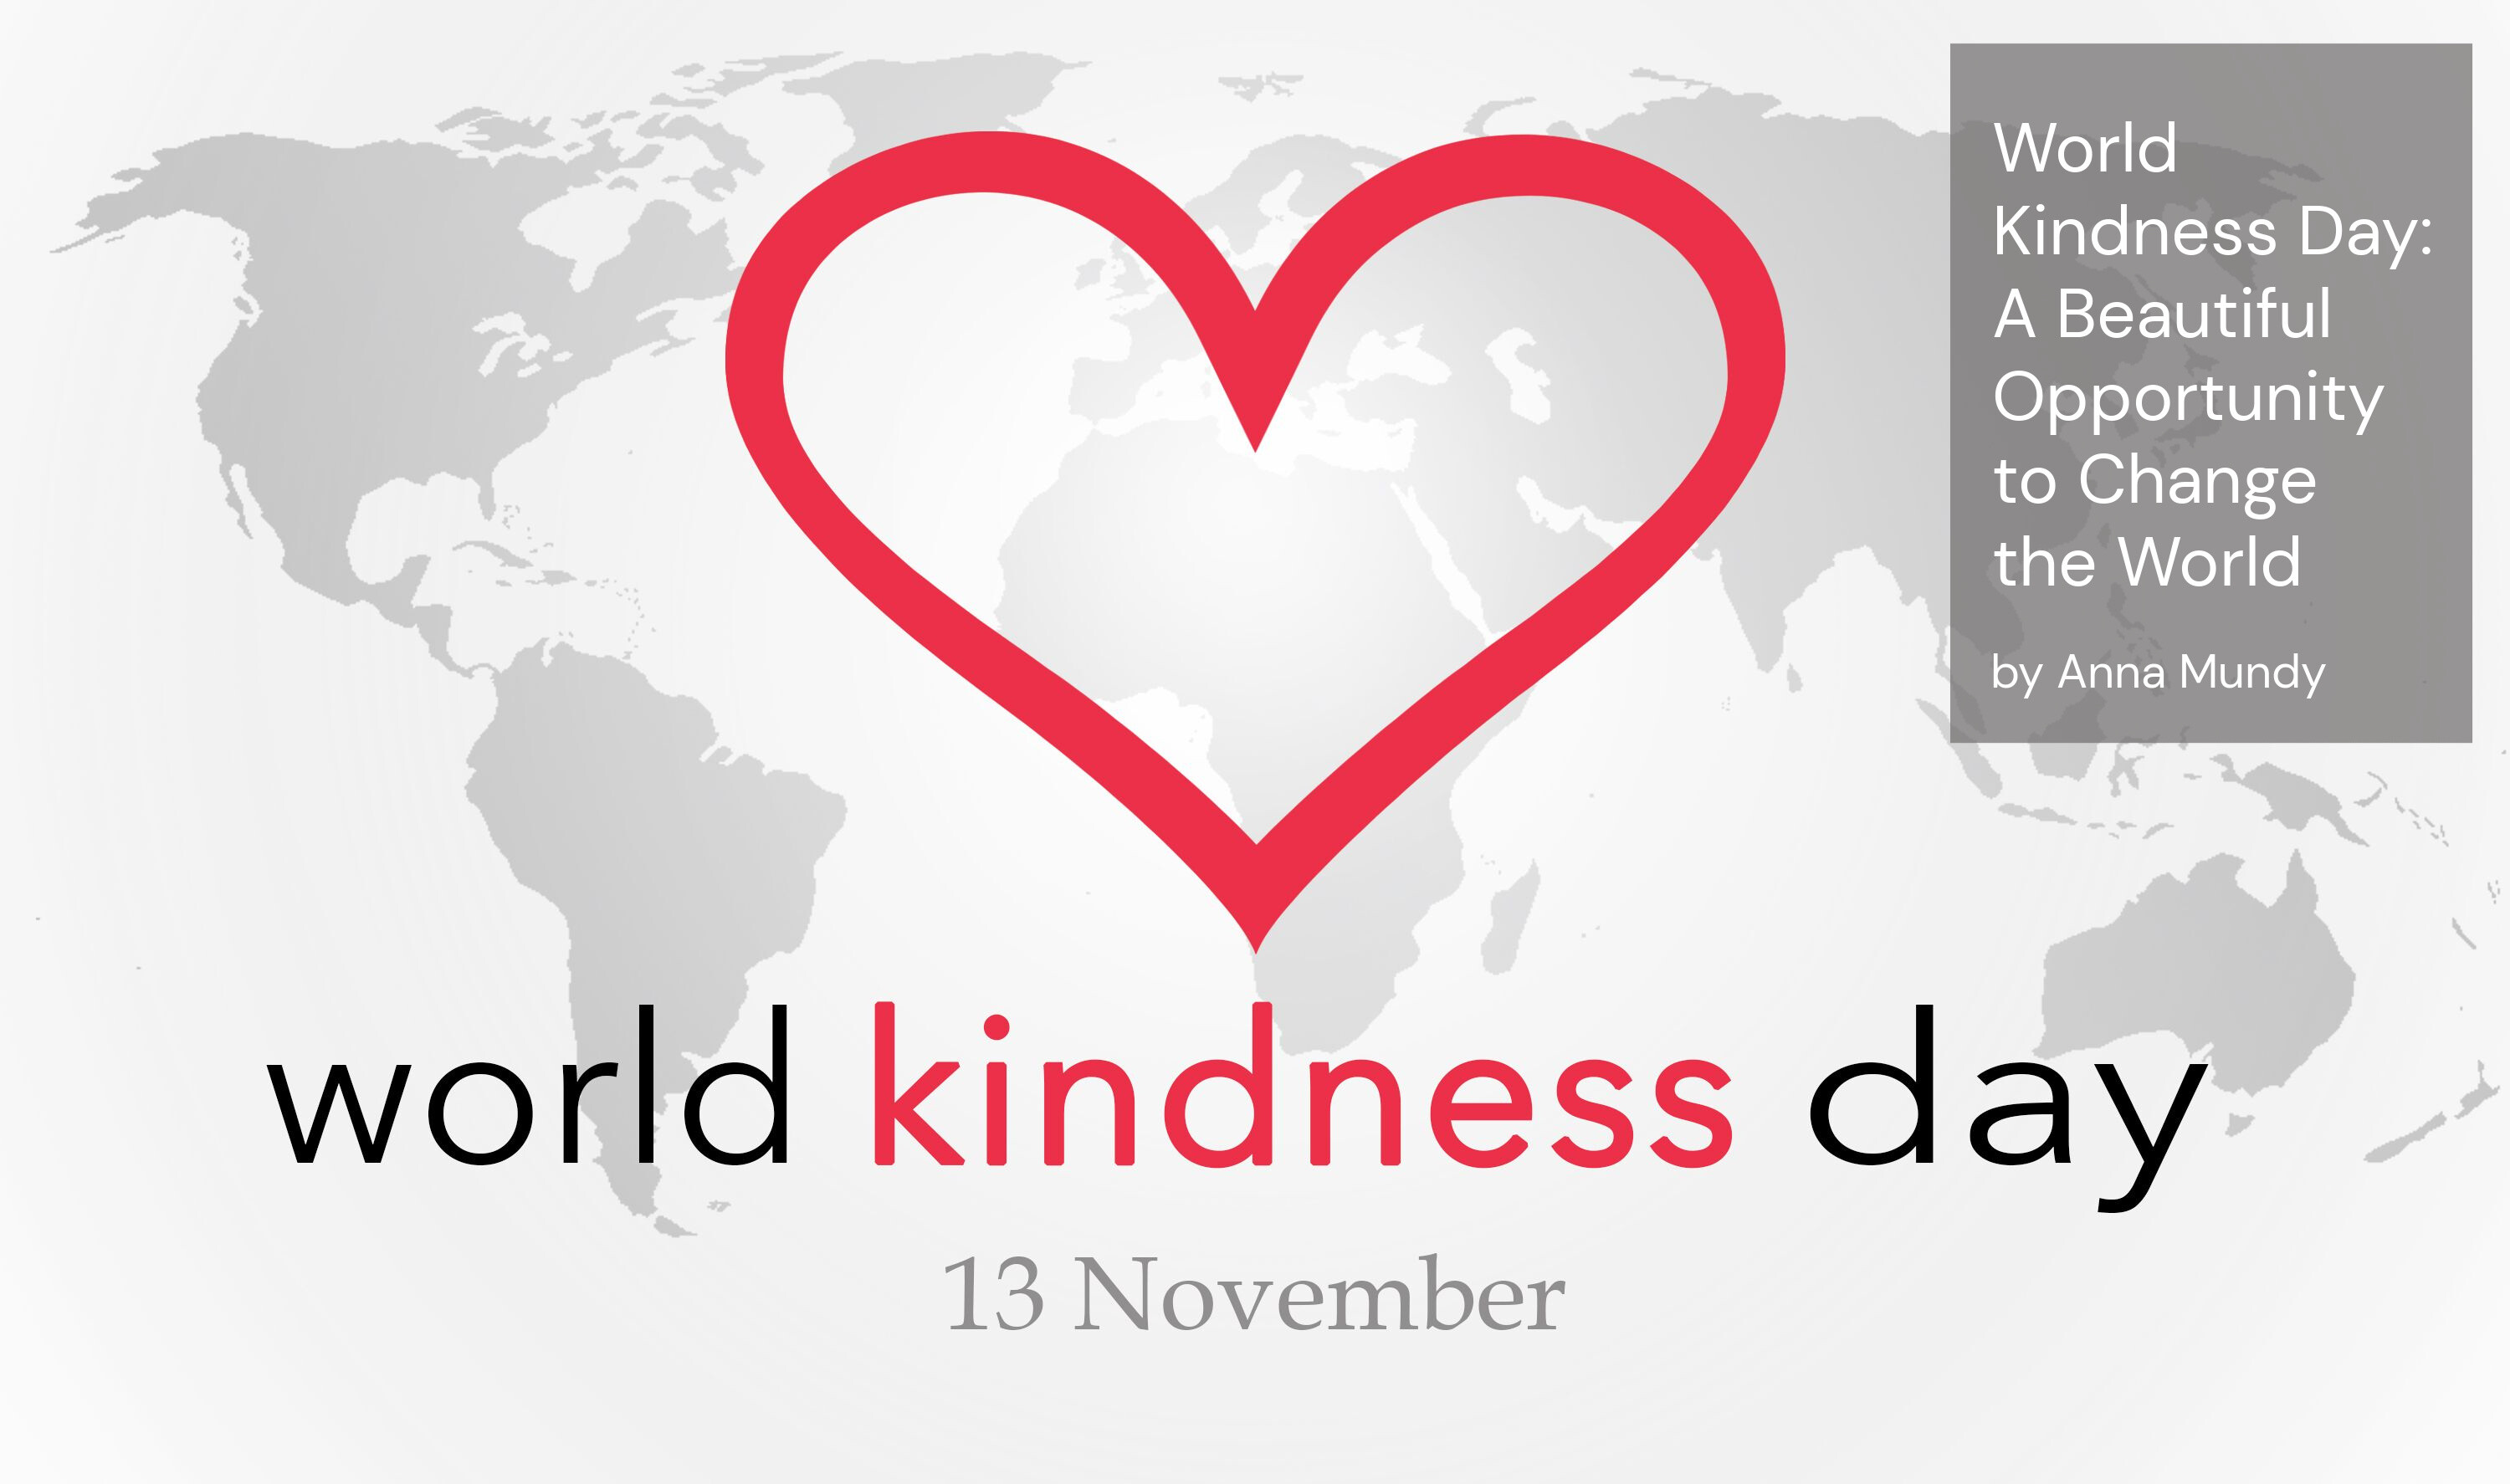 world-kindness-day-a-beautiful-opportunity-to-change-the-world